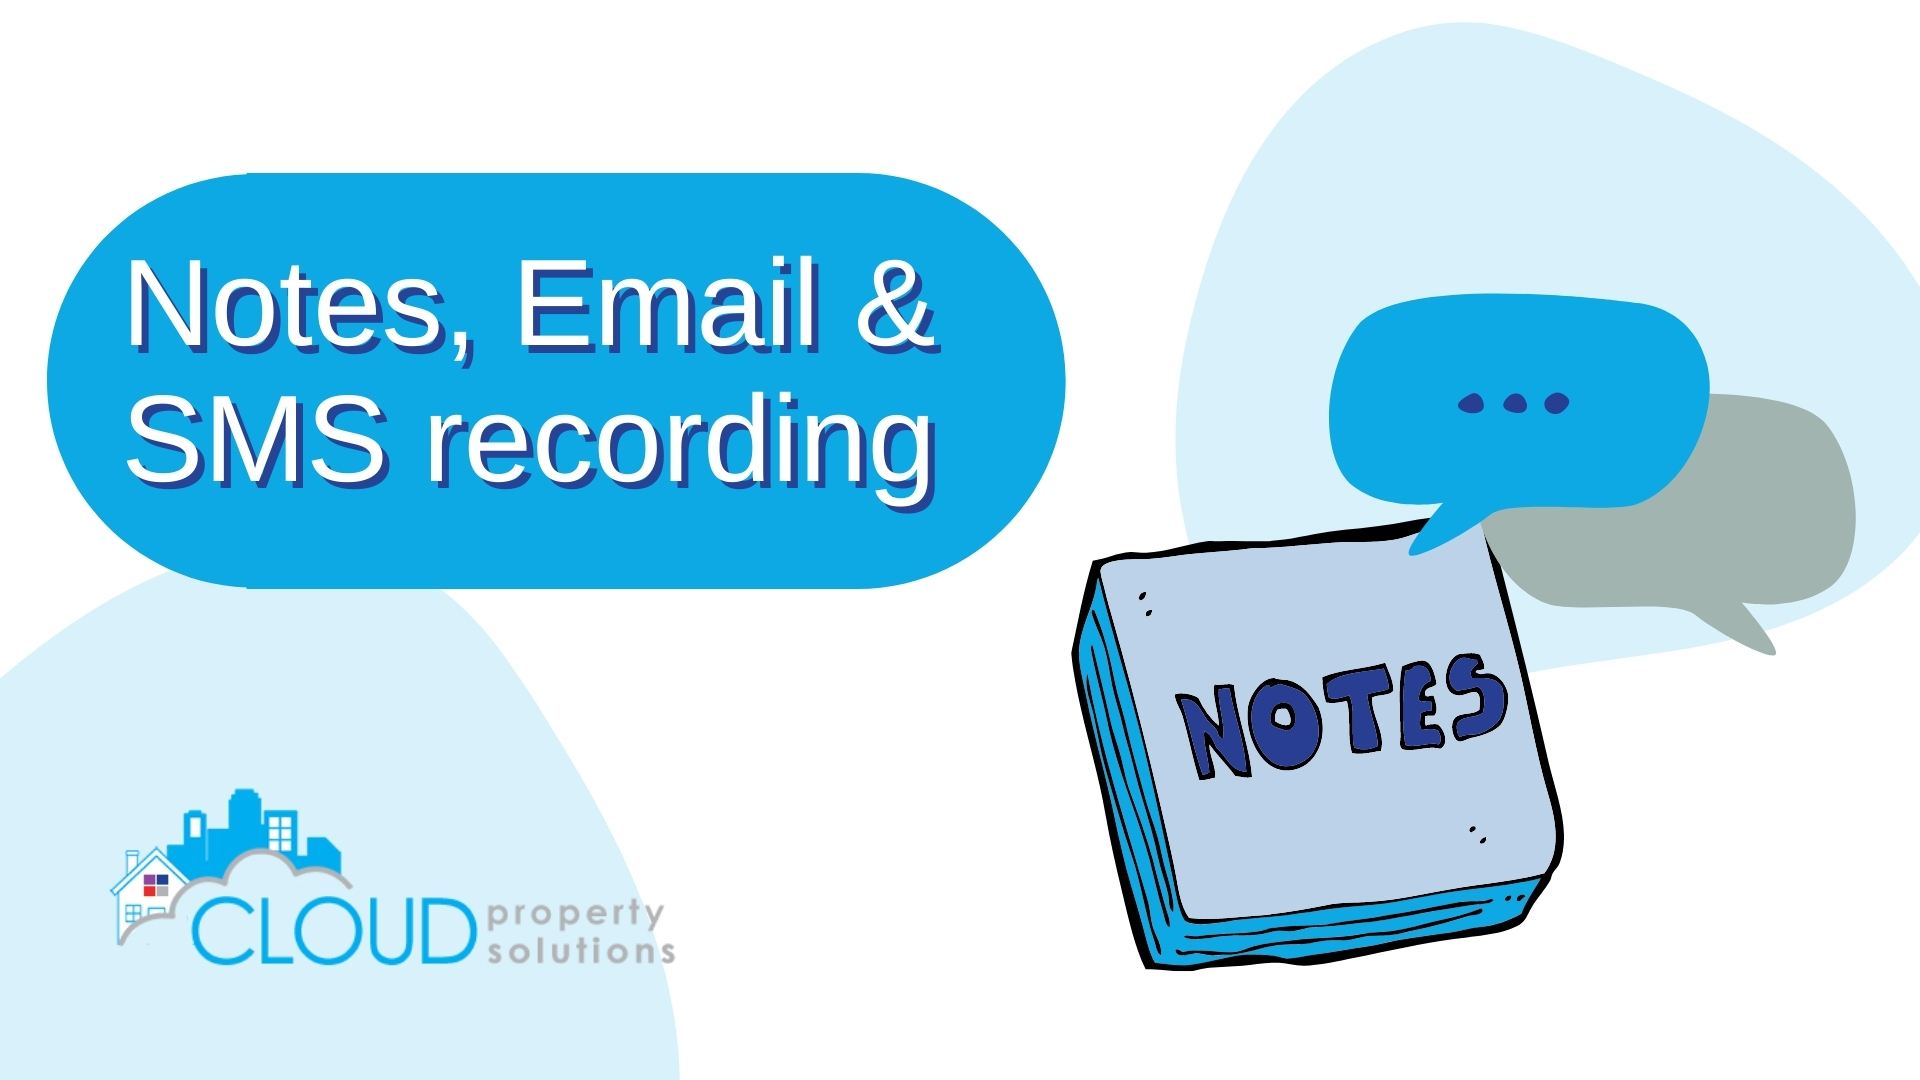 Notes, email & sms recording